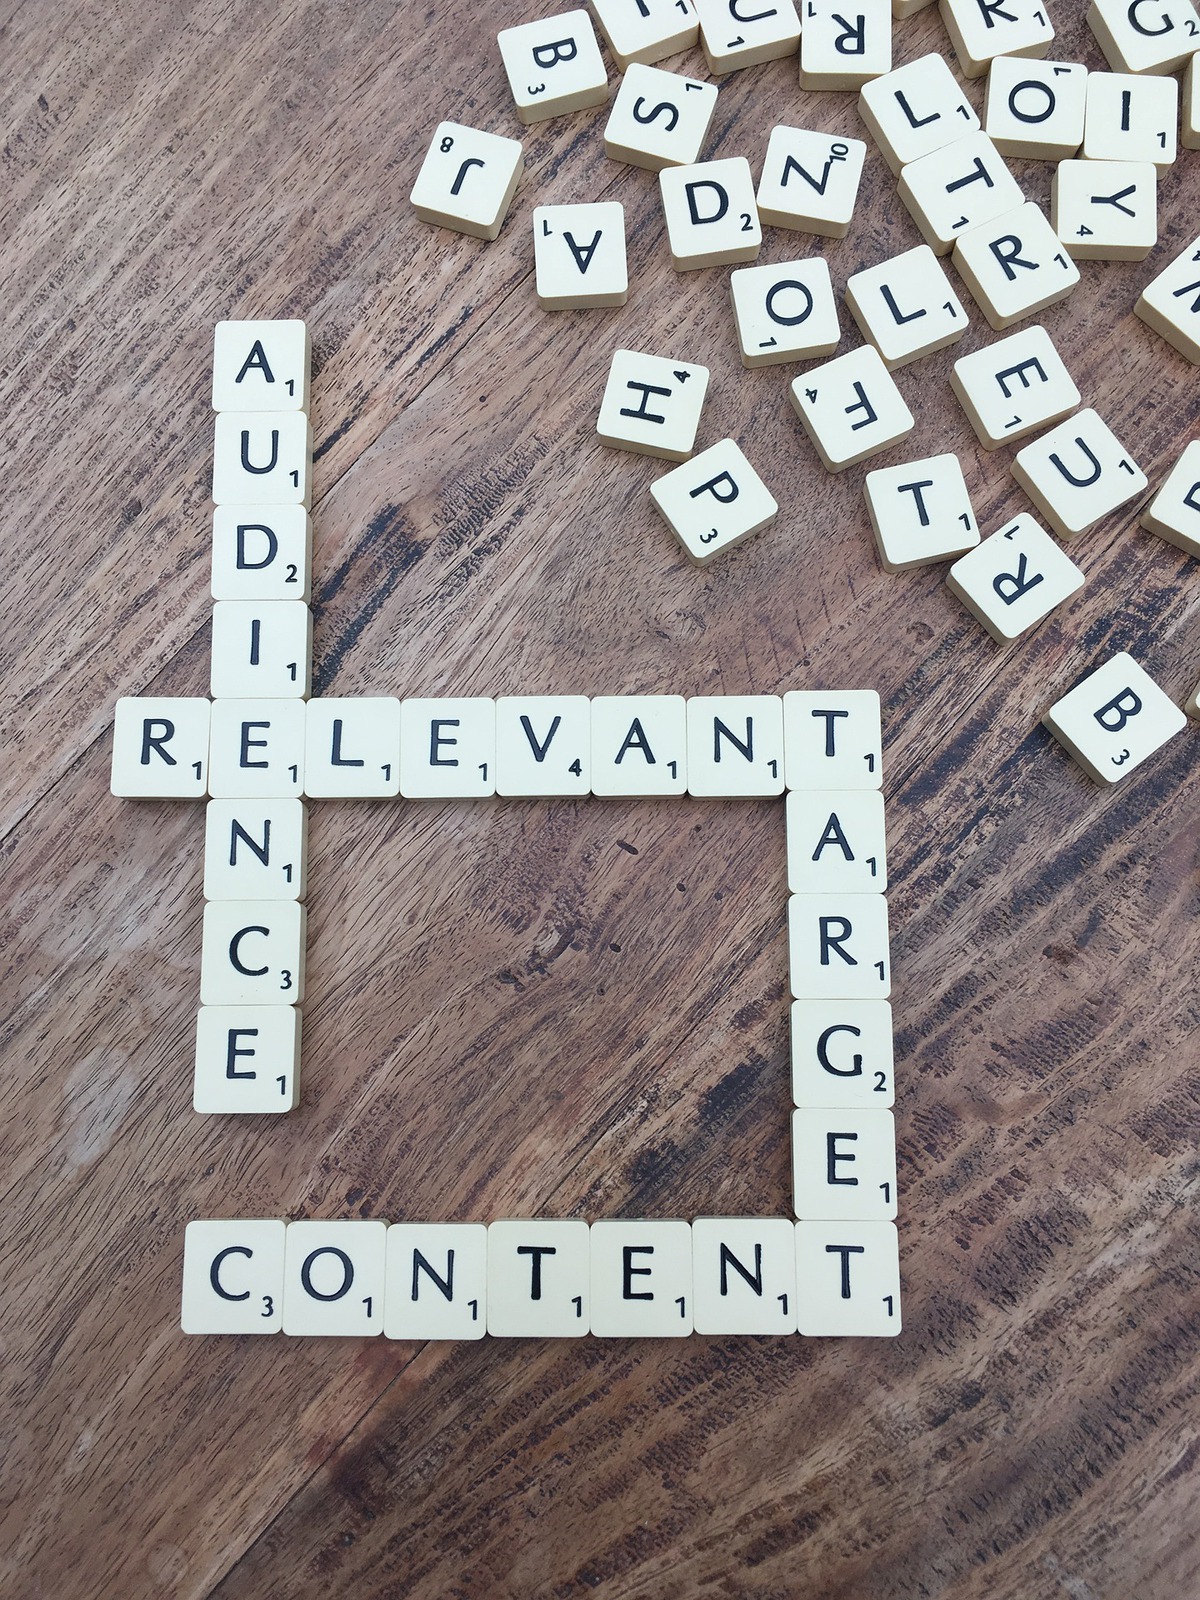 A table with scrabble tiles scattered around, with some words being spelt, including "audience," "relevant," "target," and "content."